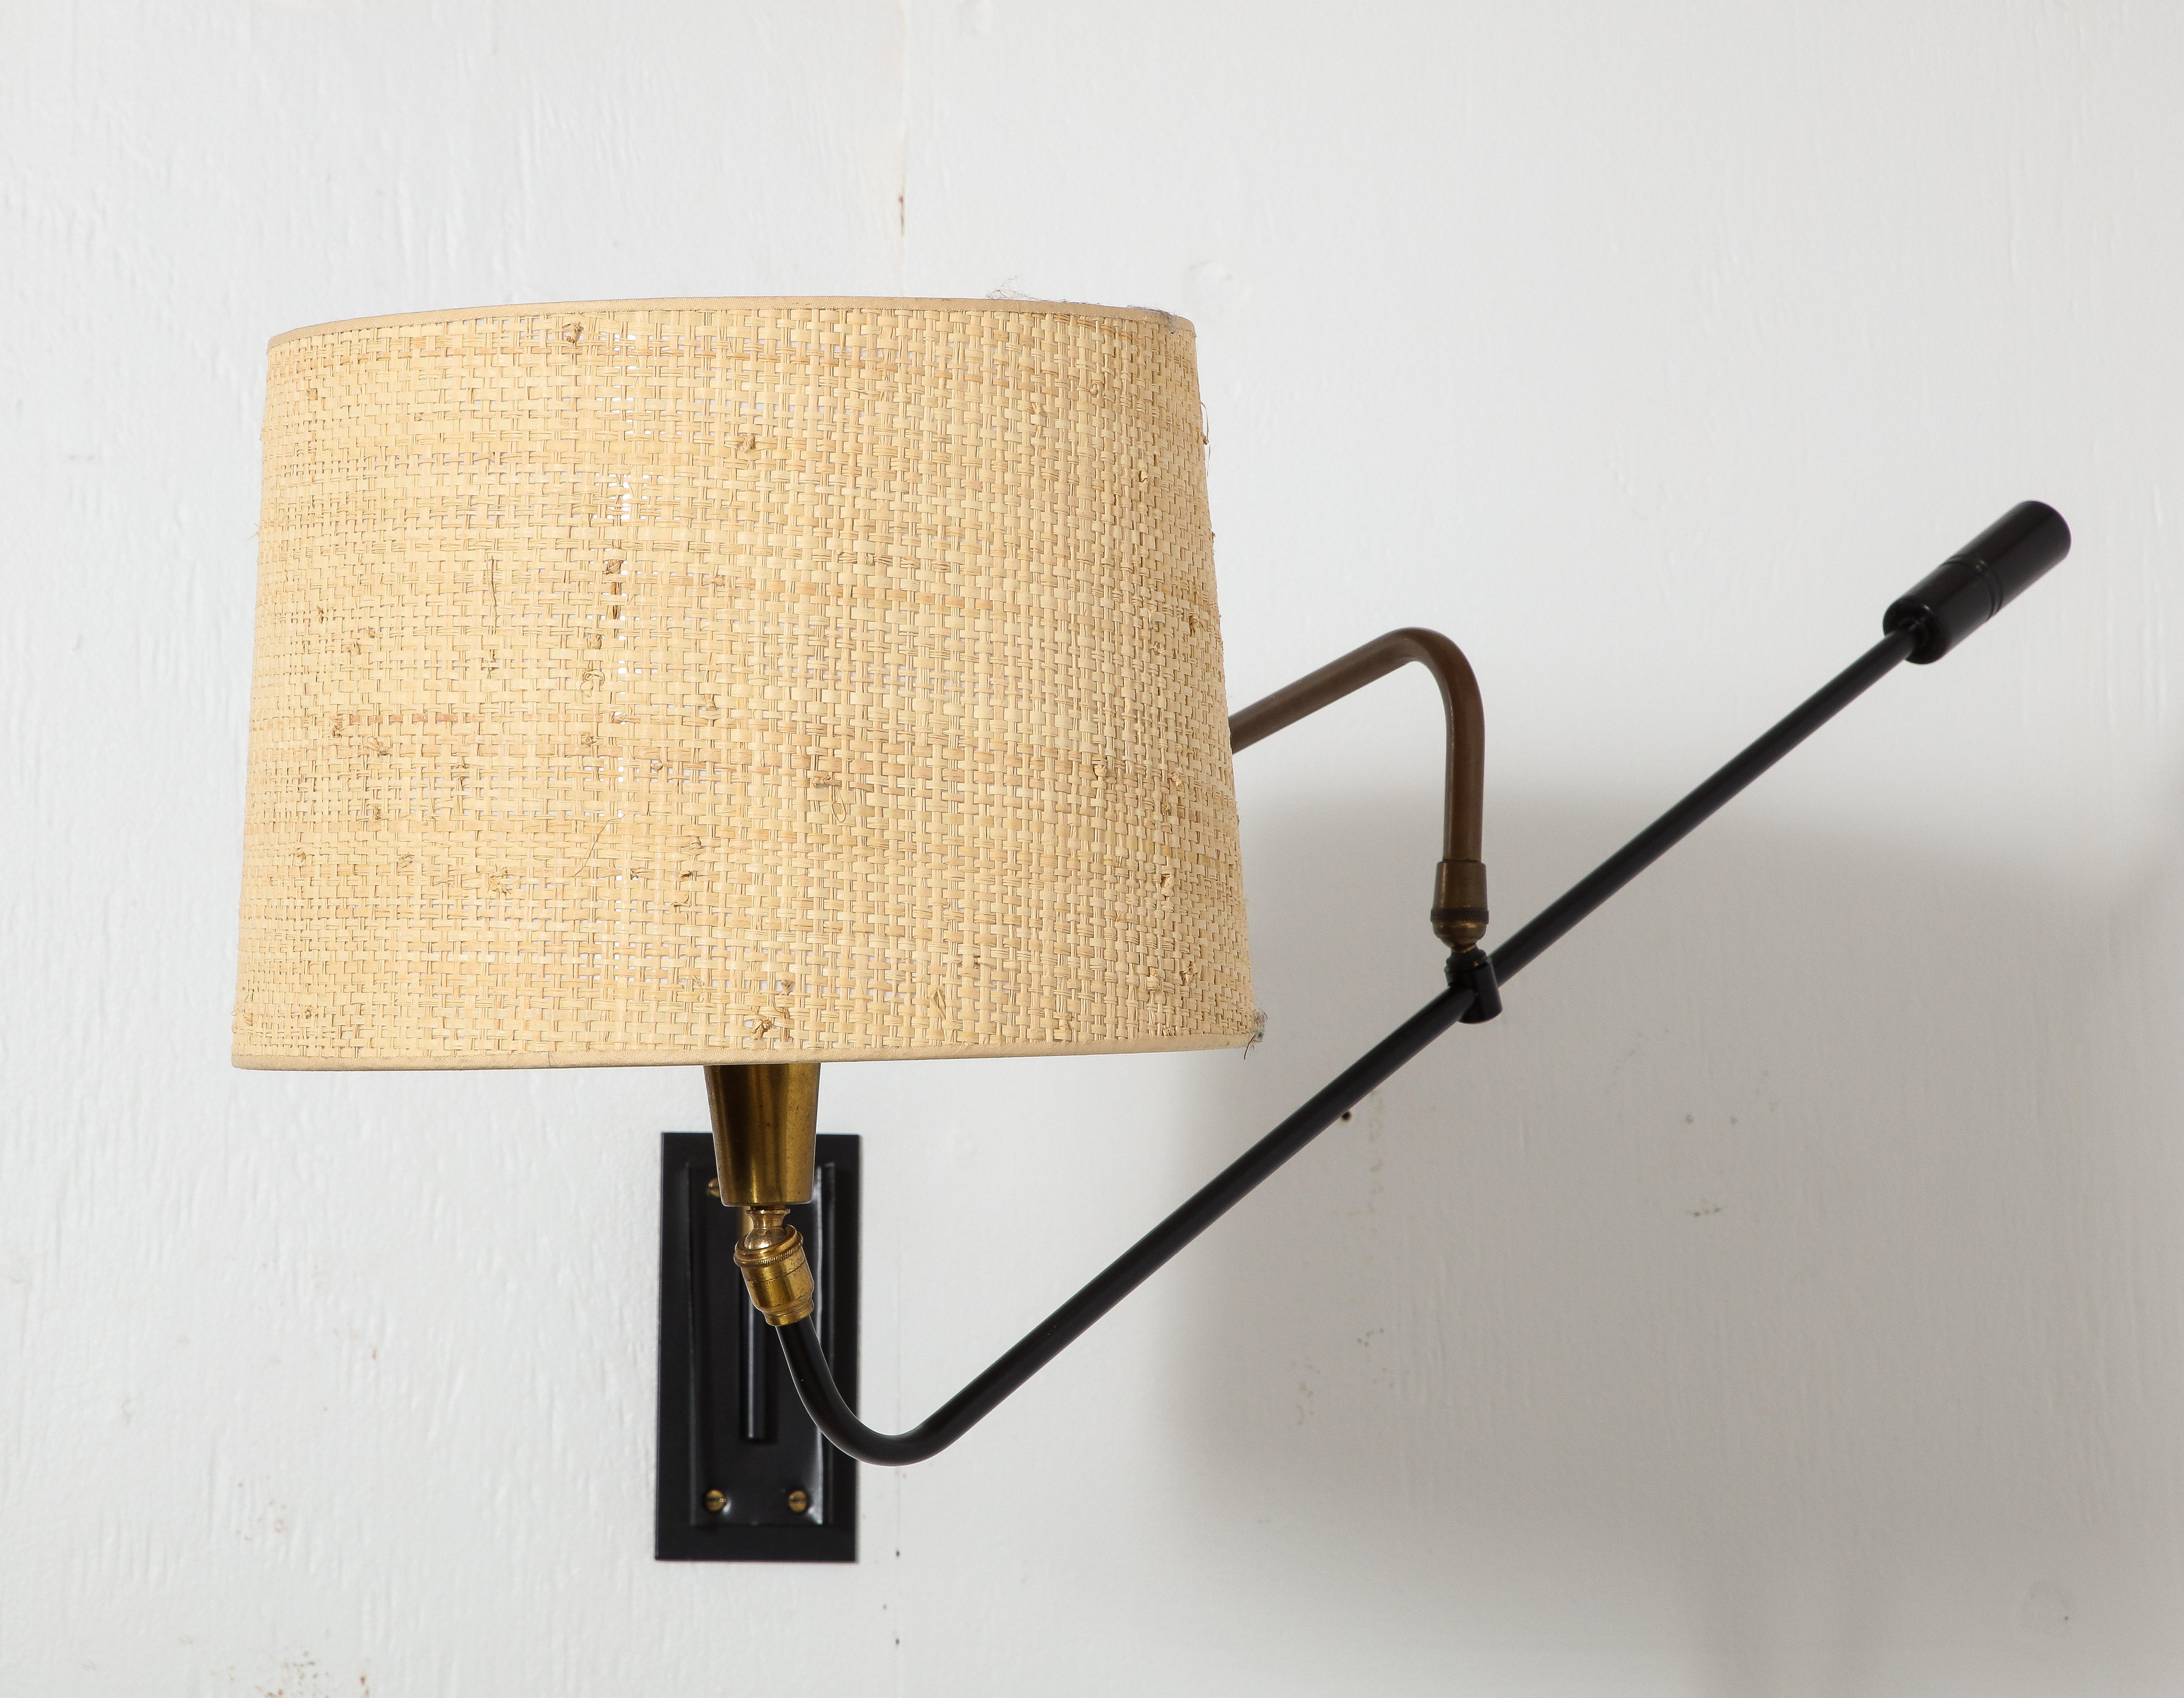 French Single Lunel Uplight Swing Arm Sconce in Brass & Steel, France 1950's For Sale